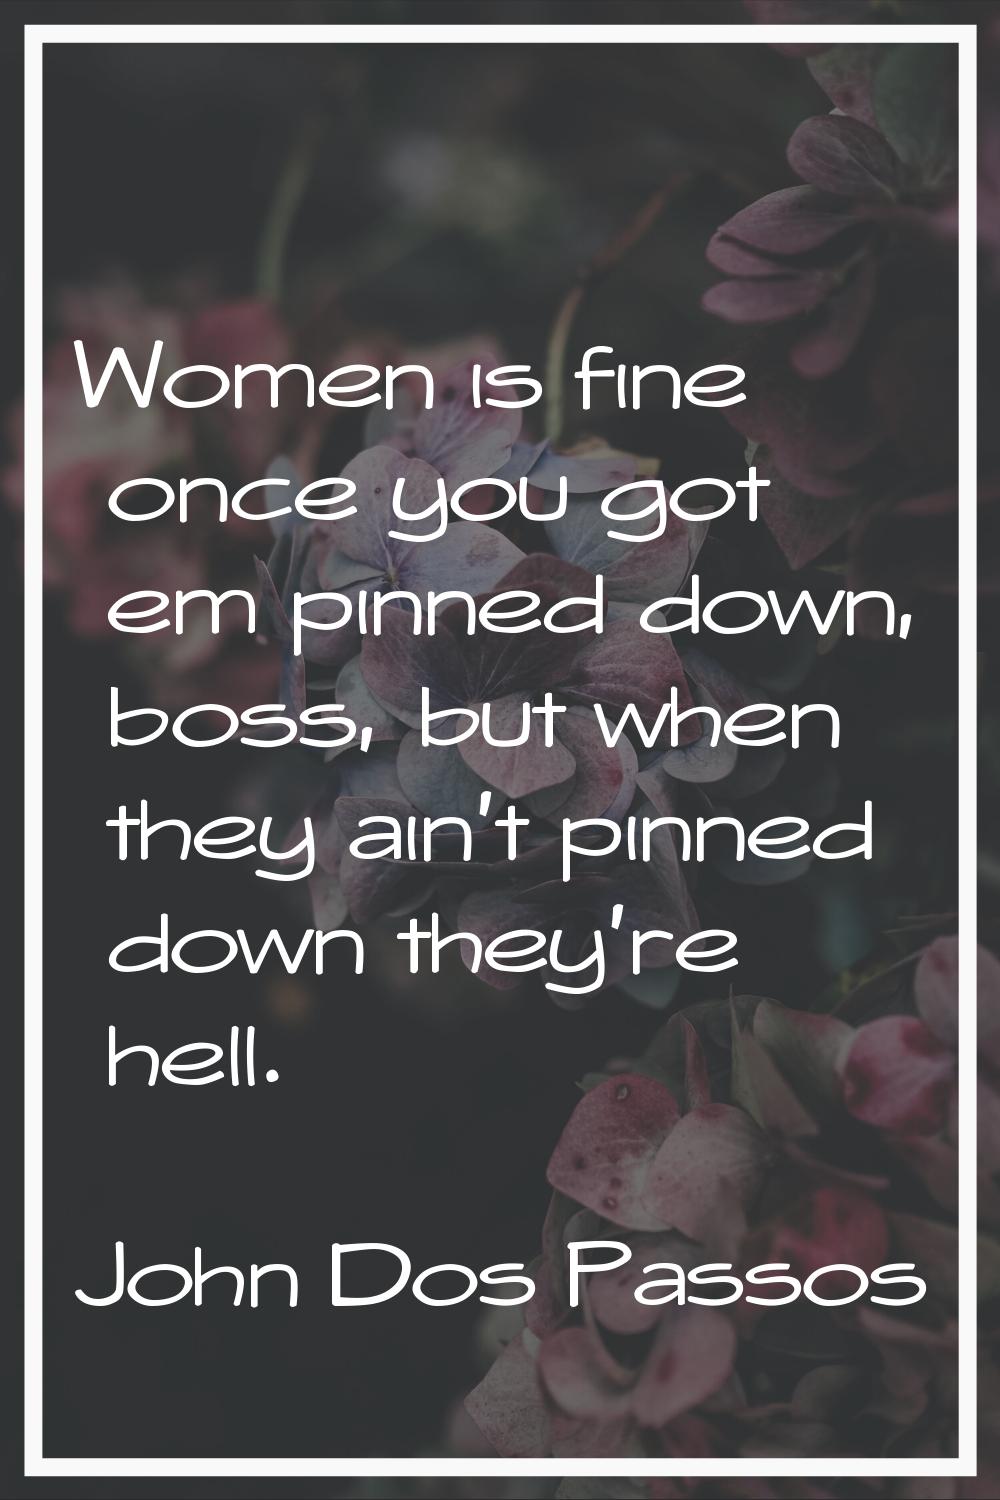 Women is fine once you got em pinned down, boss, but when they ain't pinned down they're hell.